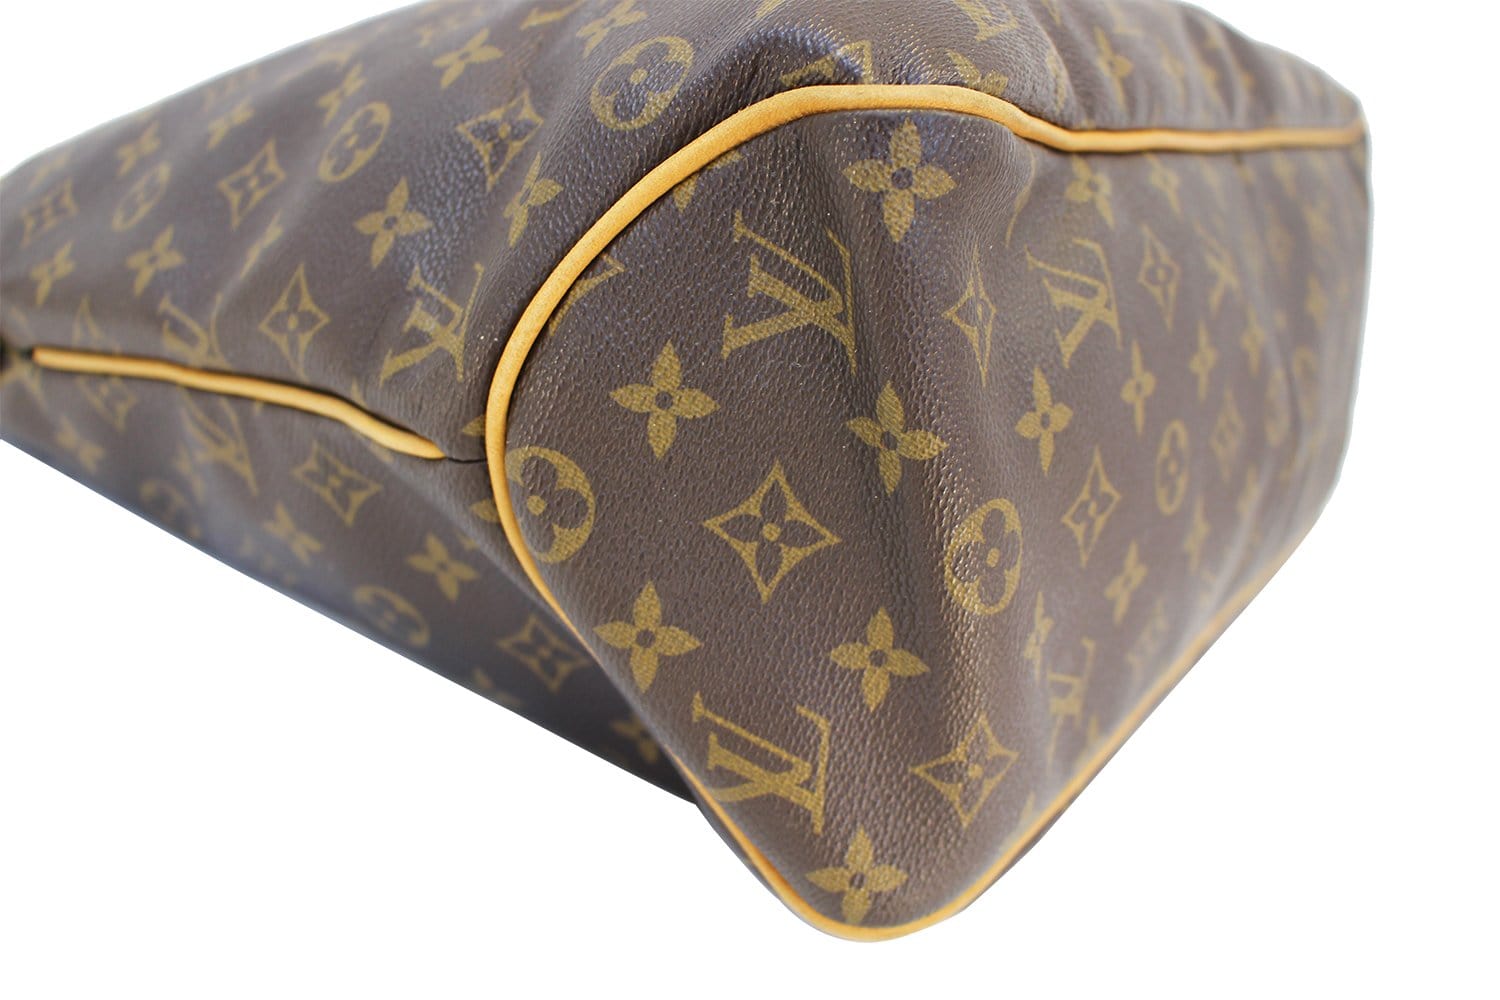 Louis Vuitton Delightful VS Neverfull: Which one to buy